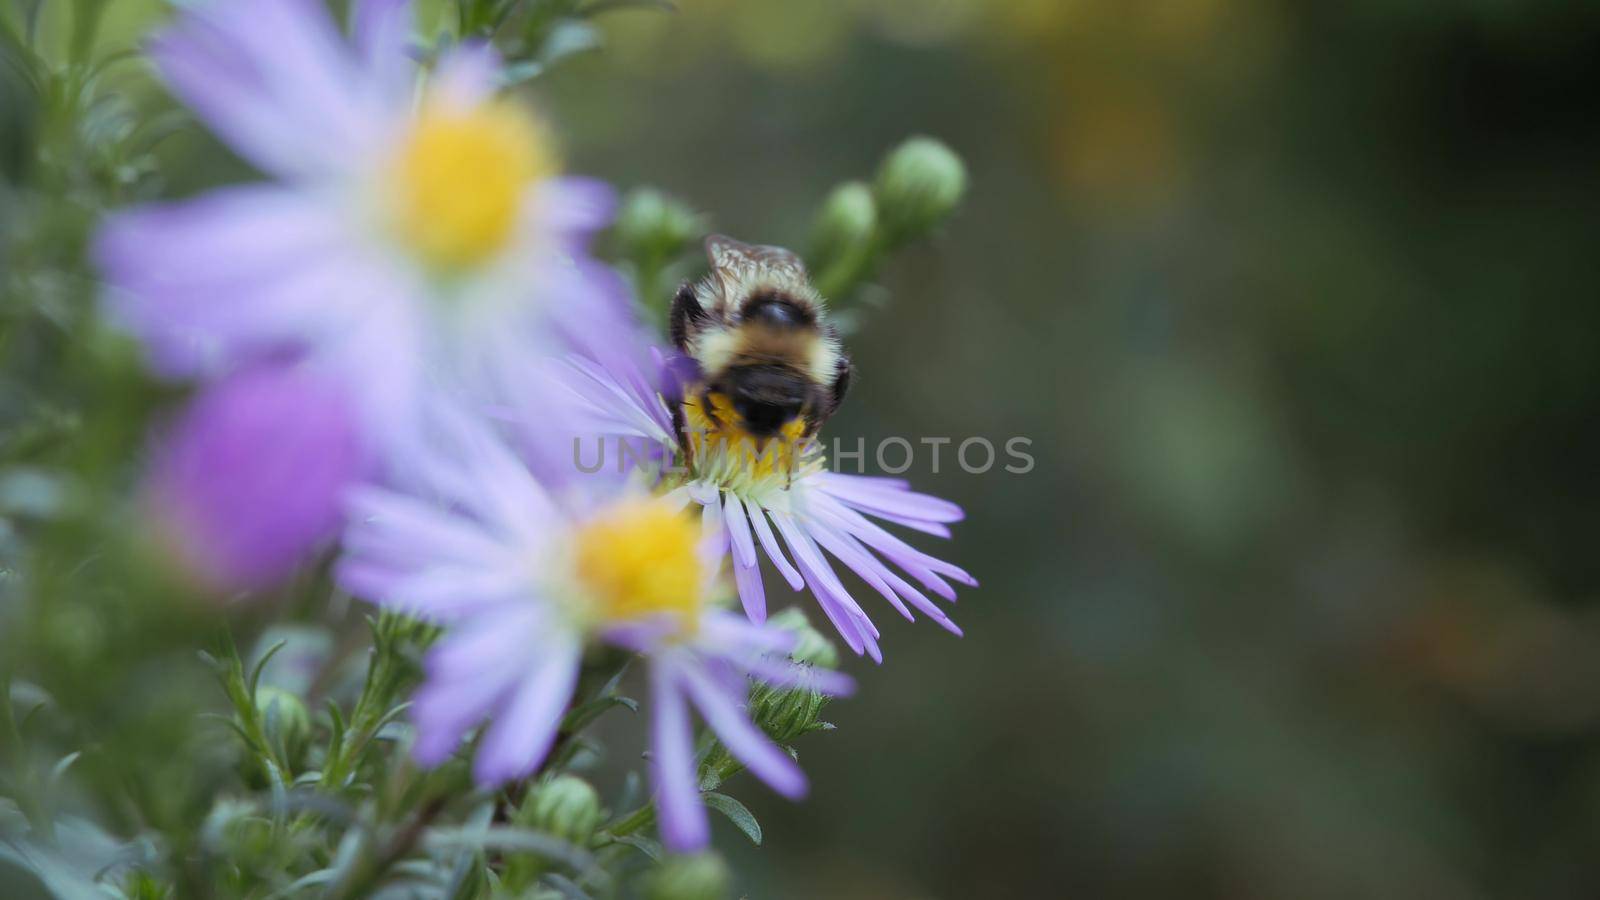 Purple aster, anemone autumn garden perennial flower and its buds. Close-up. Bumblebee on a blue flower. The insect collects pollen from an autumn flower.